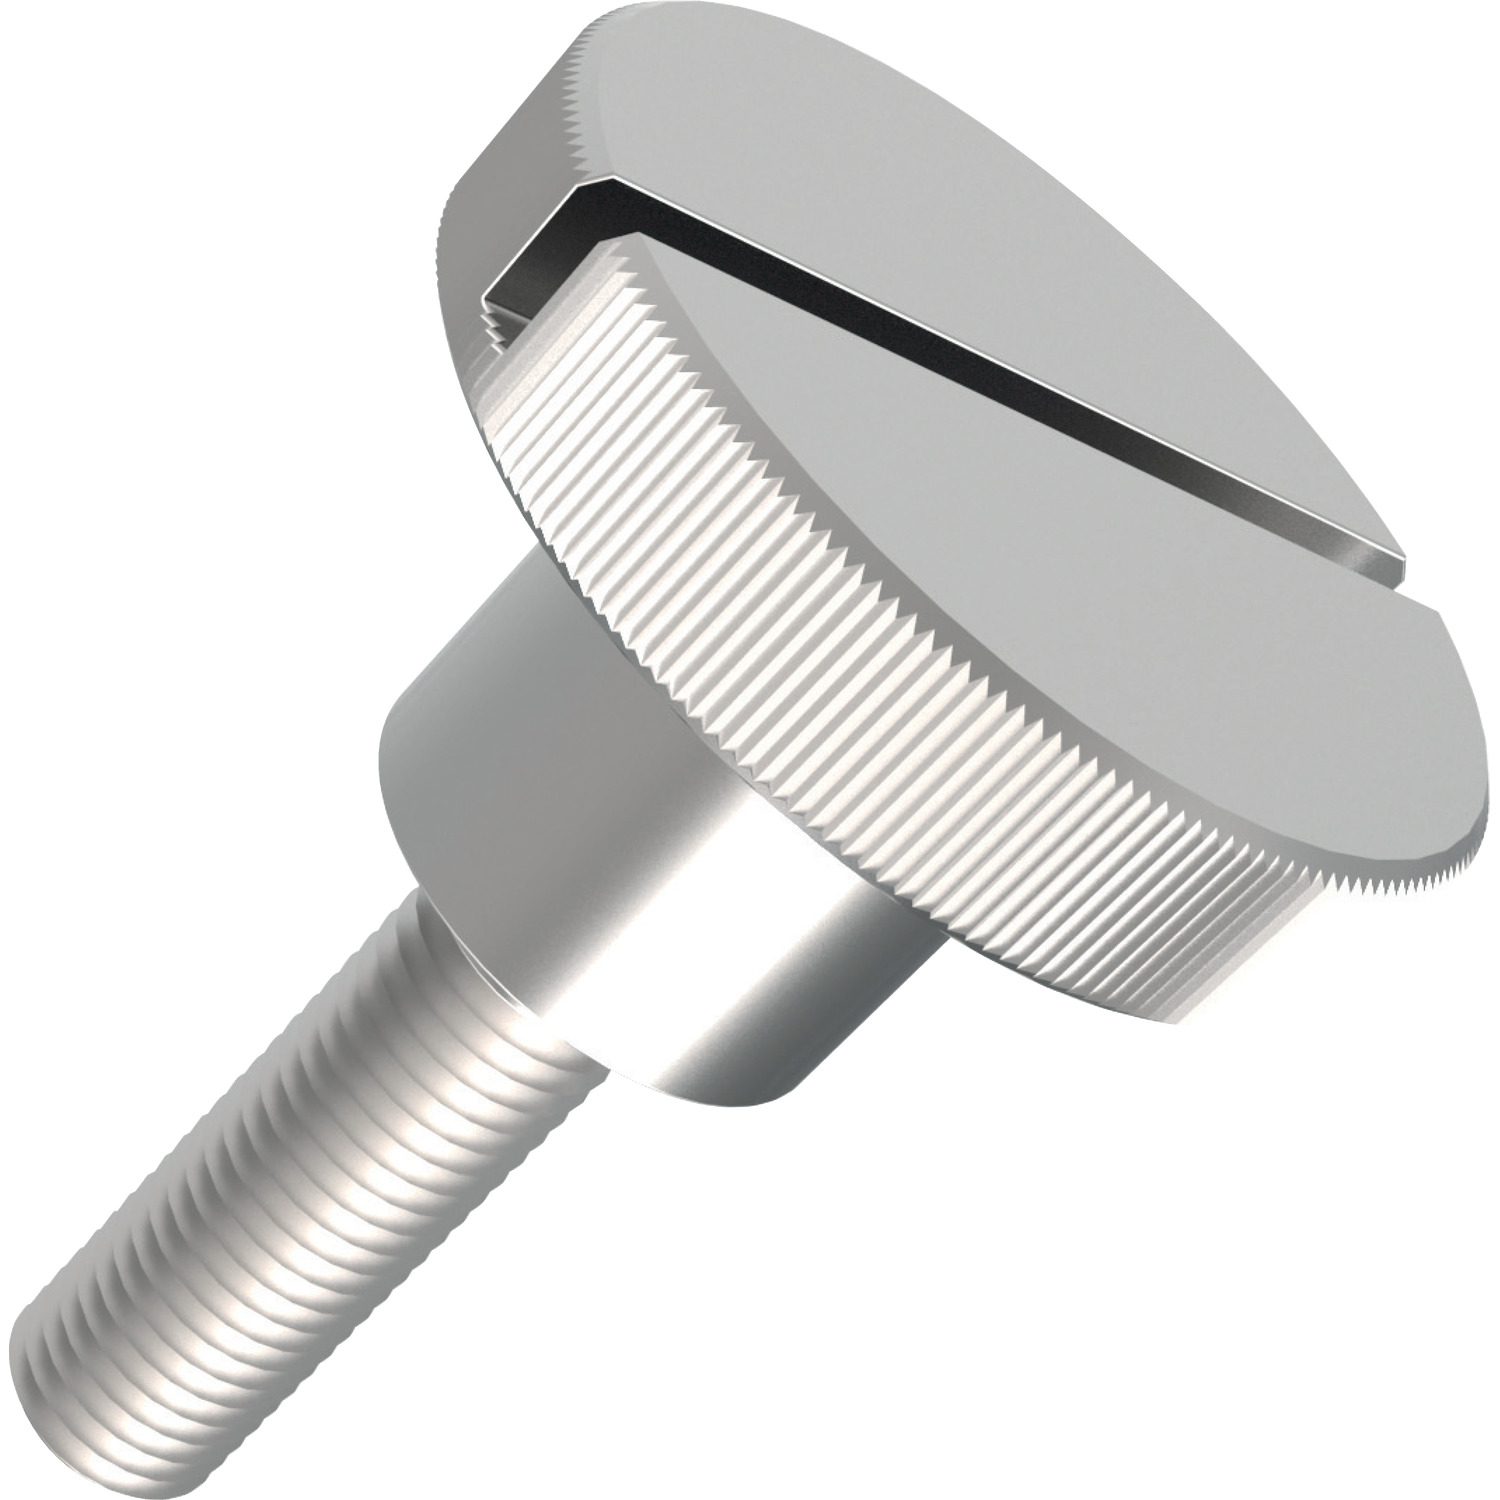 P0404 Knurled Thumb Screws with slot